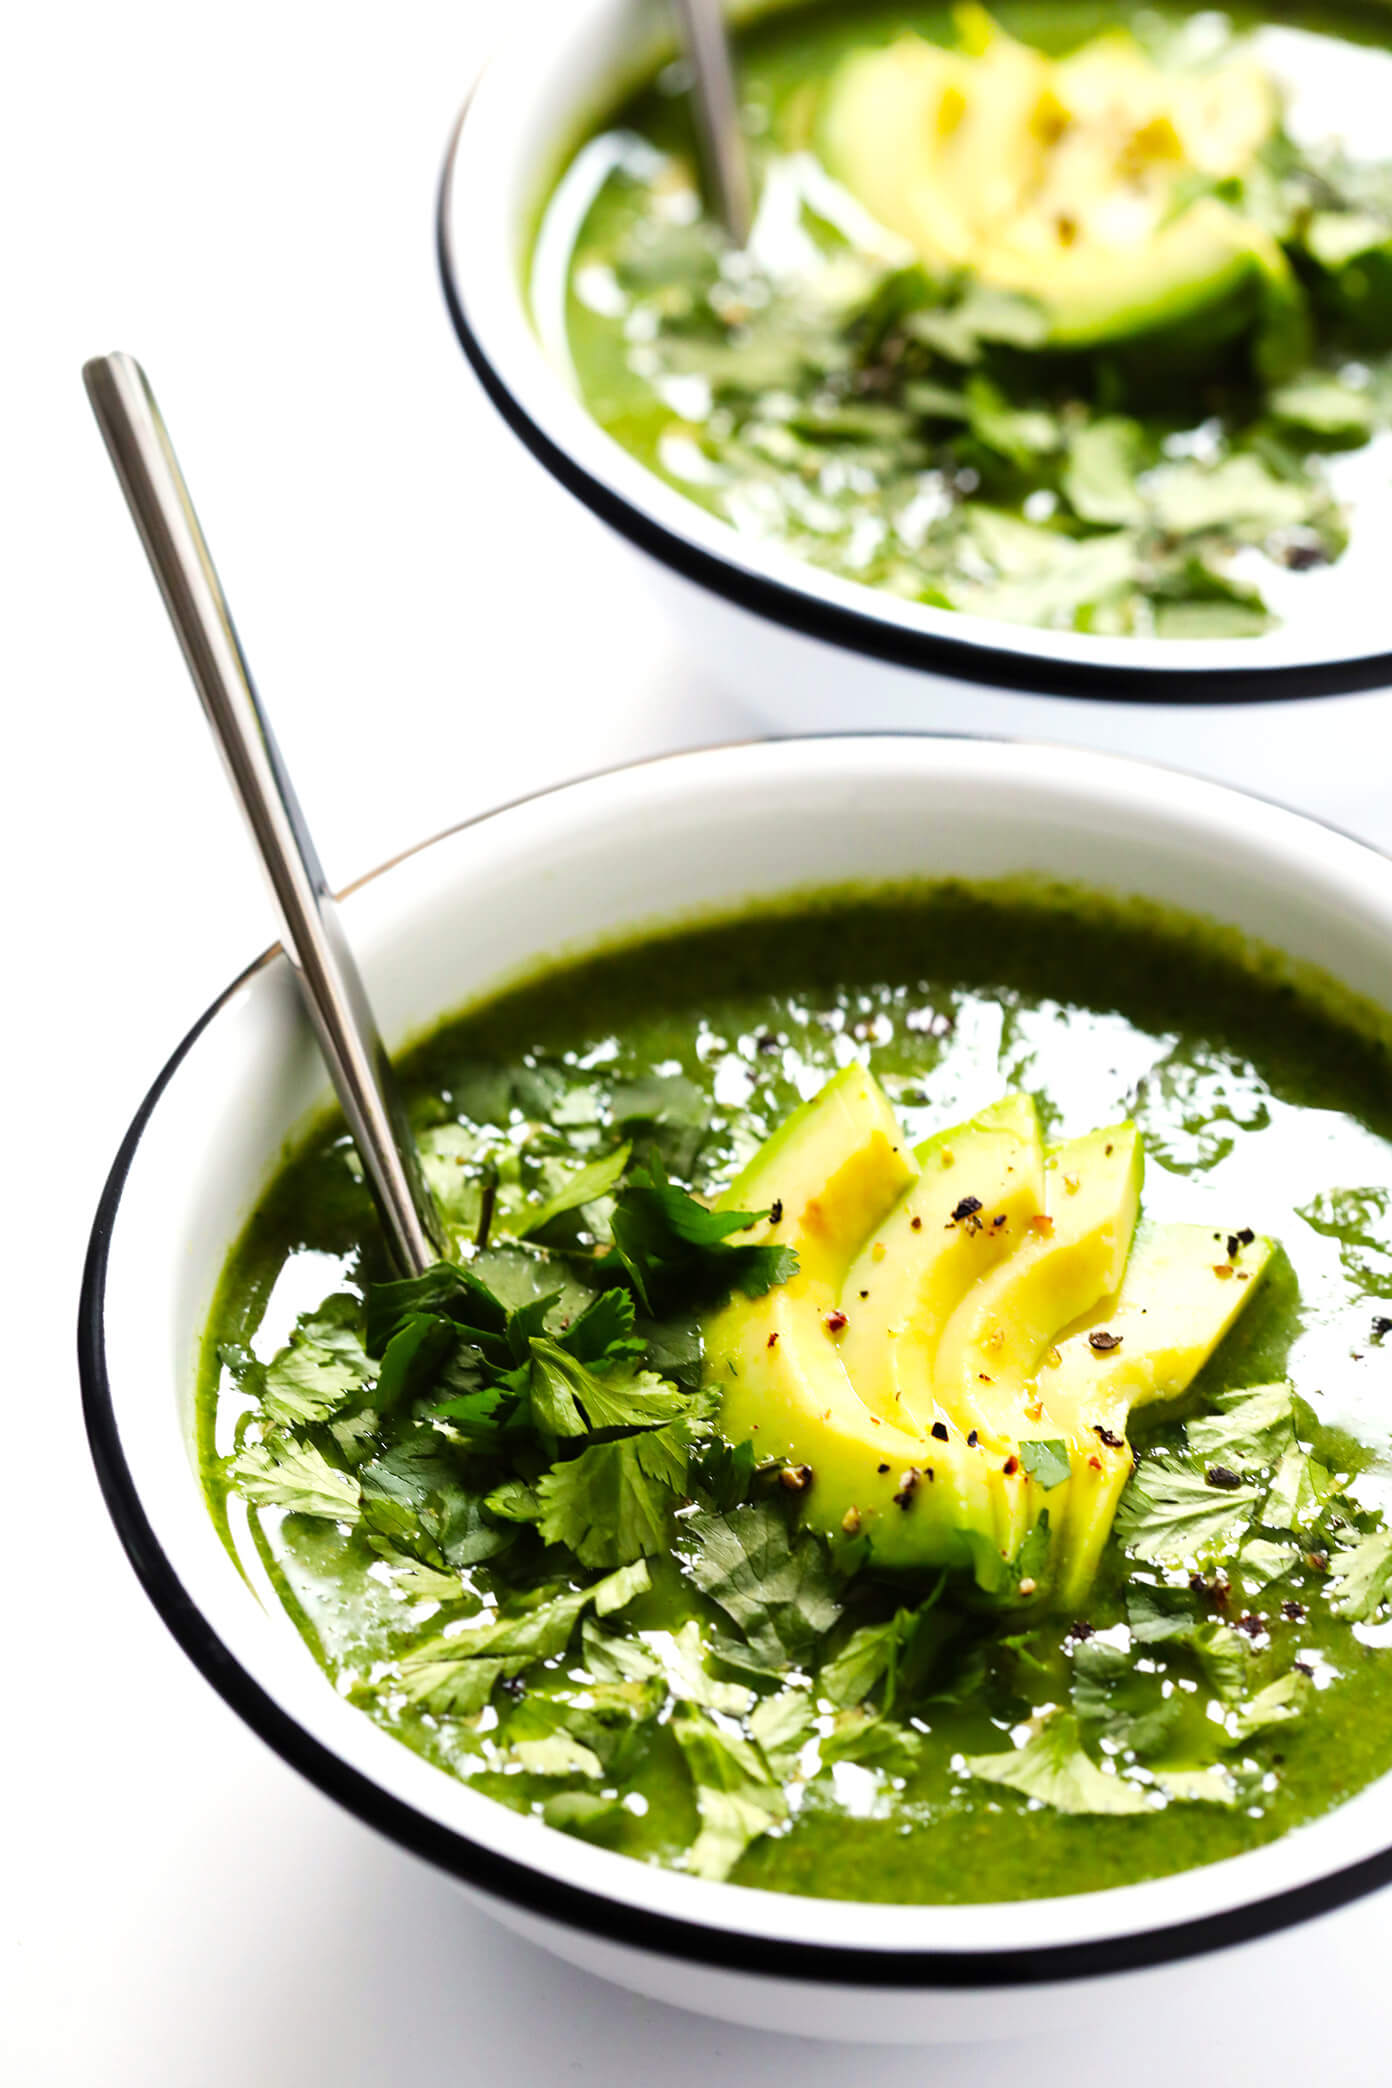 This Green Goddess Soup recipe is overflowing with feel-good veggies and greens (especially broccoli, cauliflower and spinach), it's quick and easy to make, and it tastes and feels great. Bonus? It's also naturally gluten-free and vegan. | Gimme Some Oven #greengoddess #healthyrecipes #souprecipe #broccolisoup #vegetarian